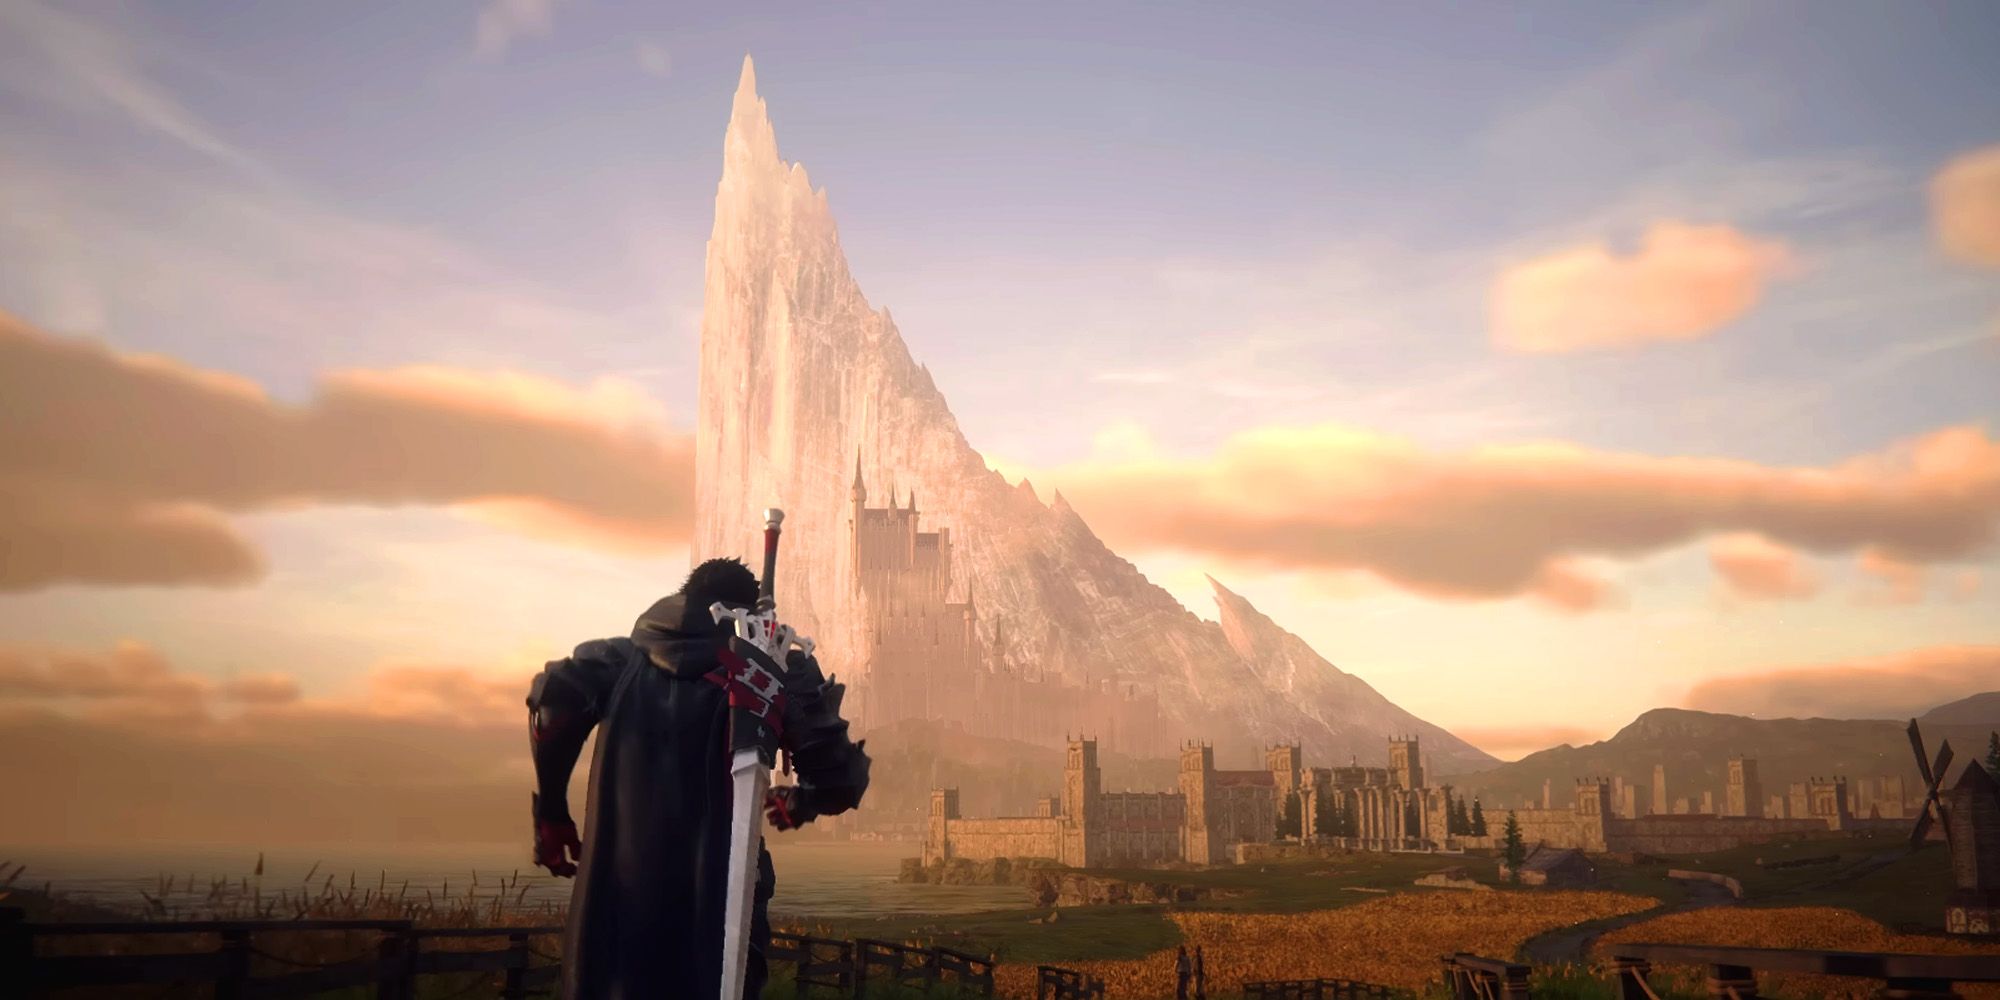 Final Fantasy 16 protagonist Clive running across a landscape with fields of wheat toward a city. A tall moutnain spire is in the background.